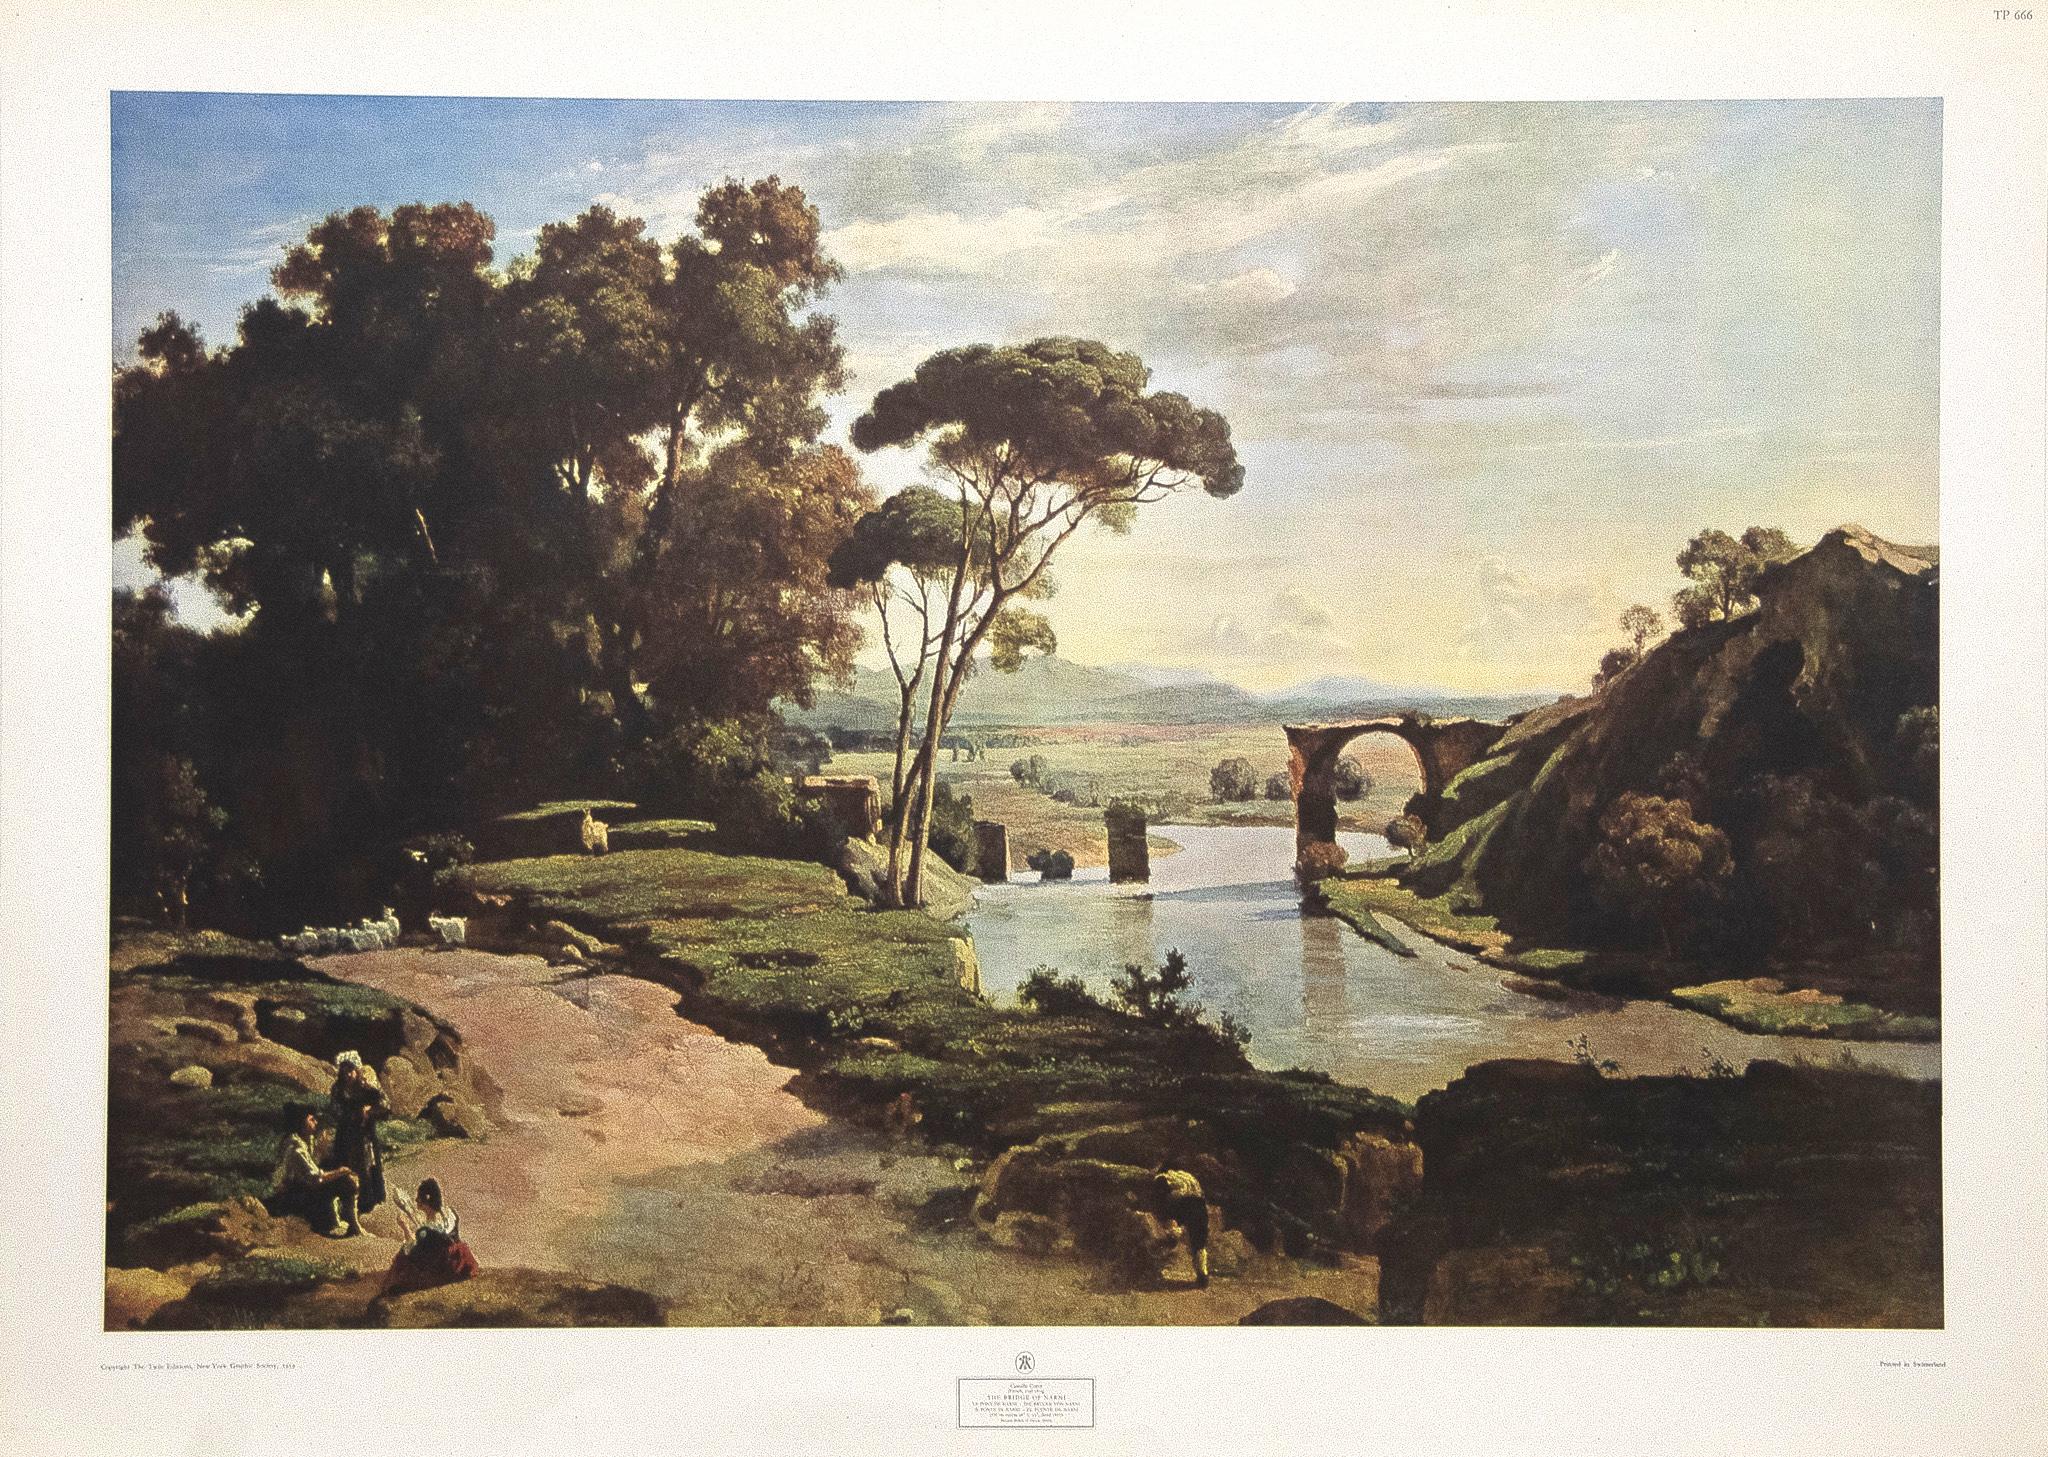 Jean-Baptiste-Camille Corot Landscape Print - "The Bridge of Narni" by Camille Corot. Limited Edition Lithograph: TP 666